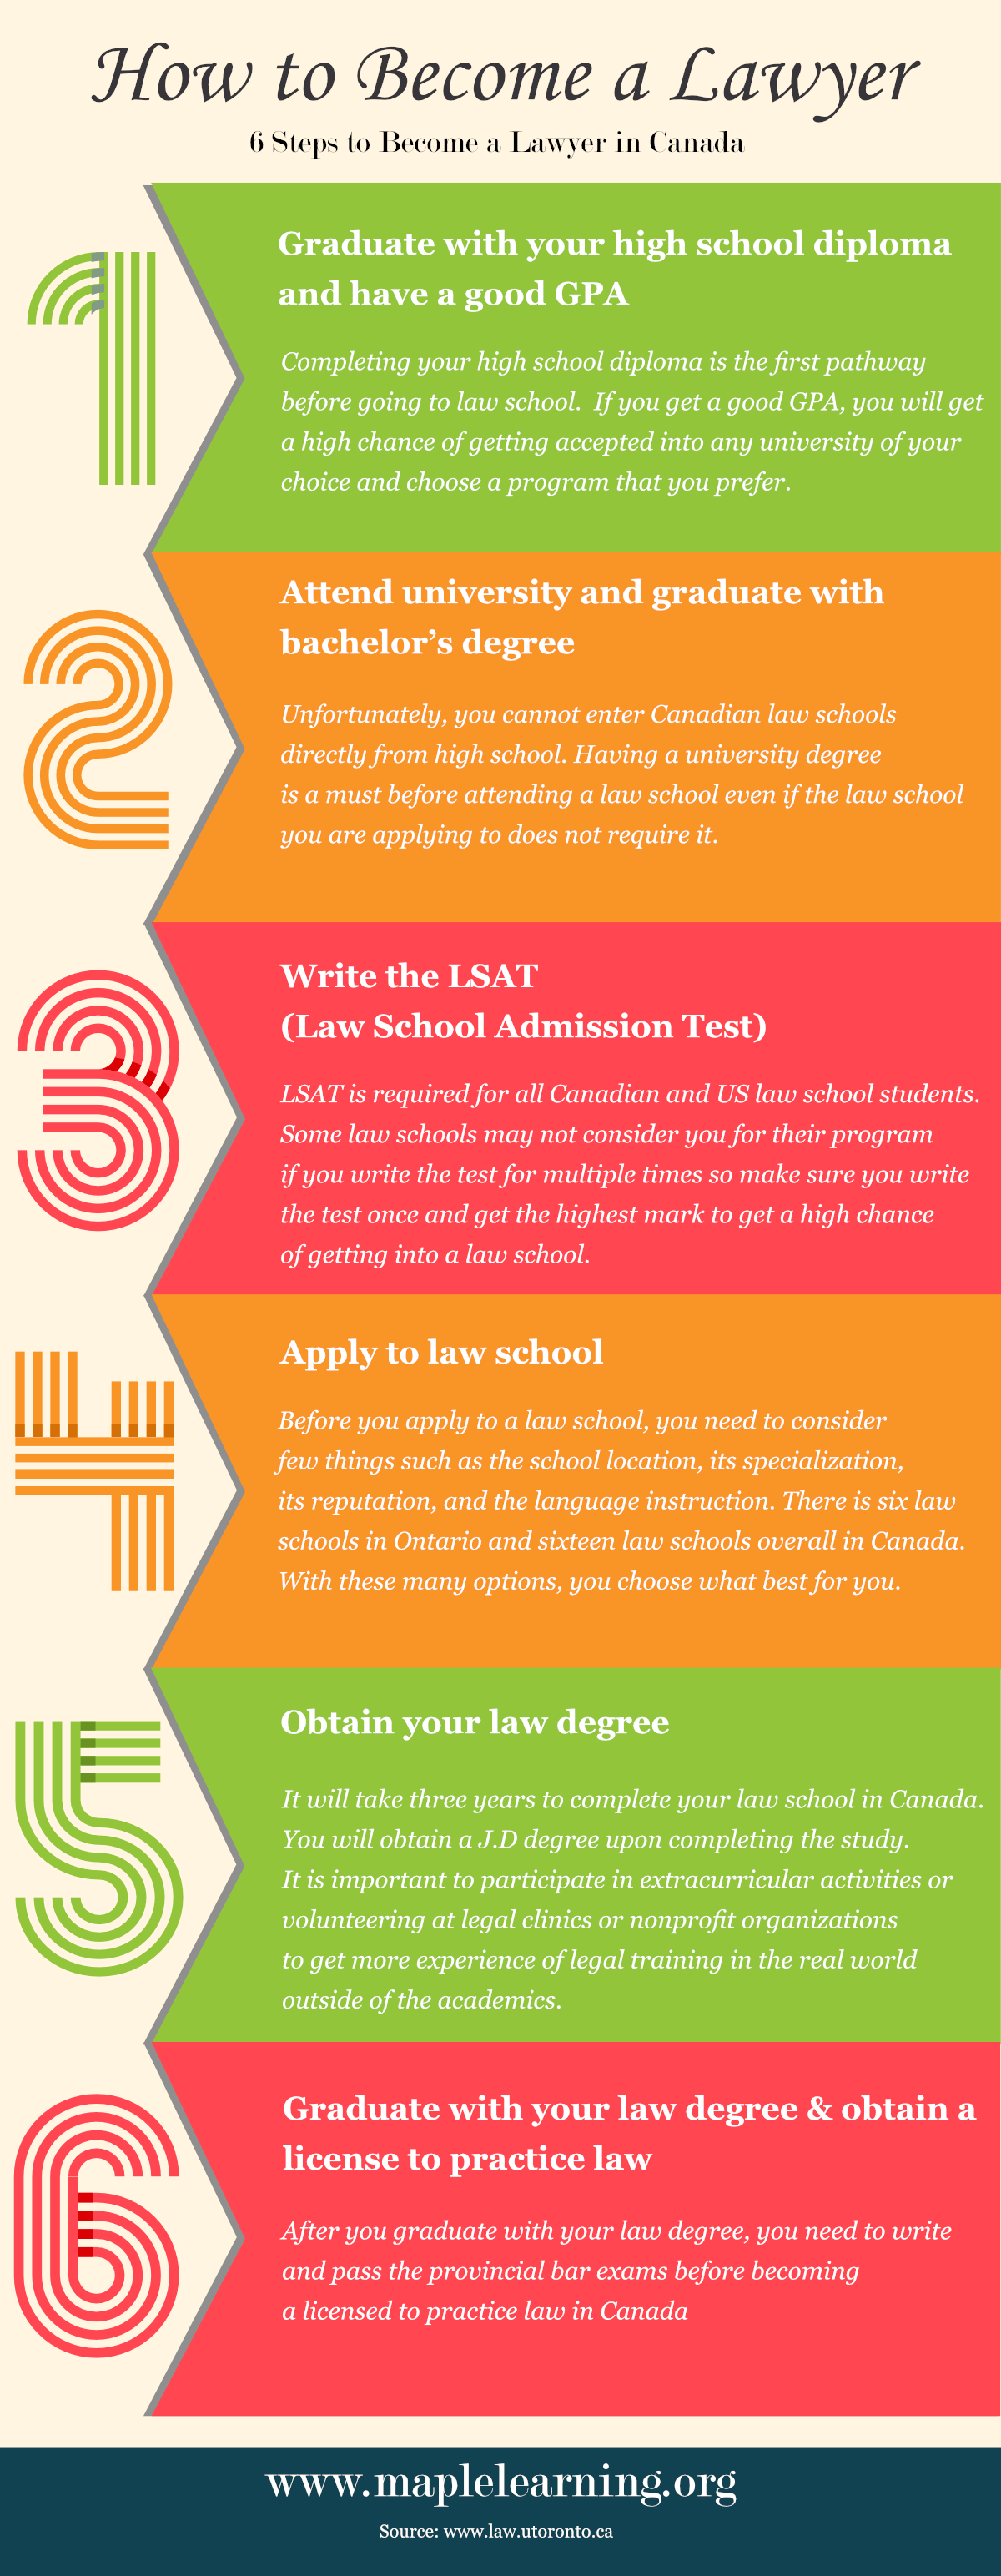 How to become a lawyer in Canada